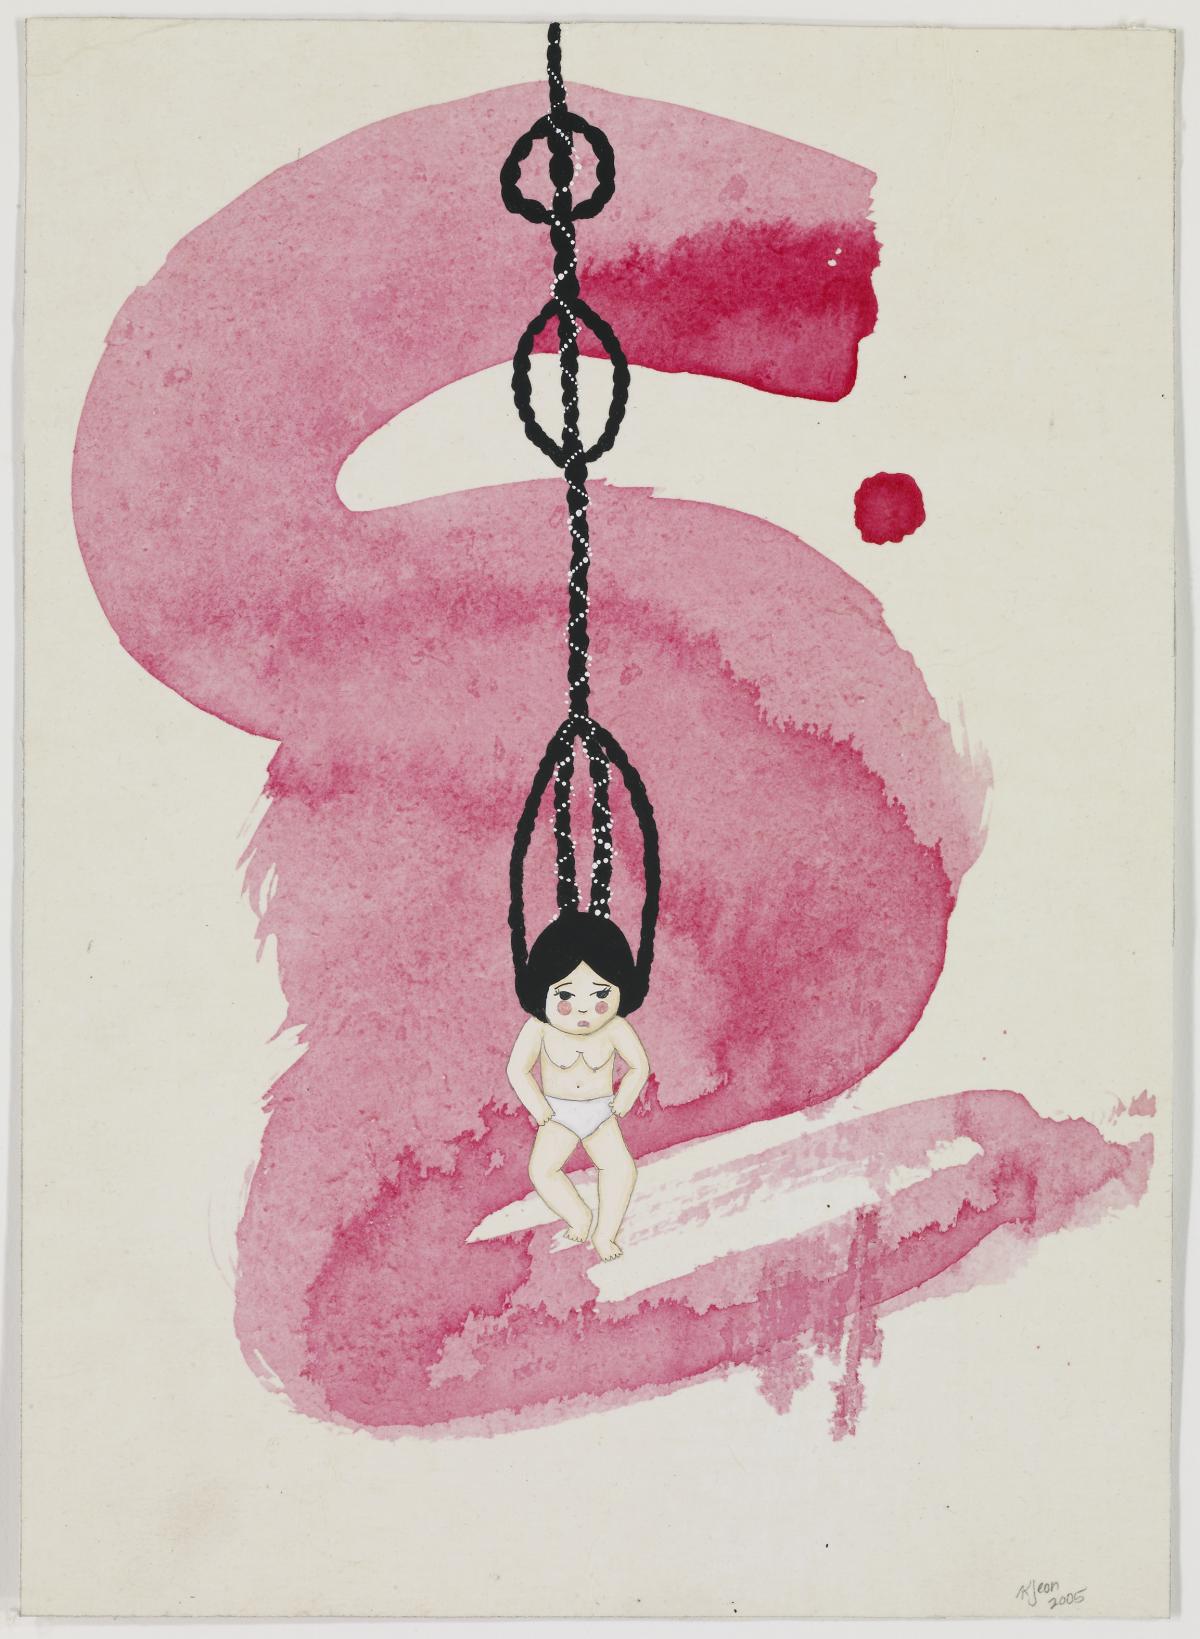 Artwork by Kyung Jeon titled Hair Chandelier, 2005, Graphite, gouache, acrylic ink on rice paper on linen, 13 x 9.5 inches, 33 x 24.1 cm